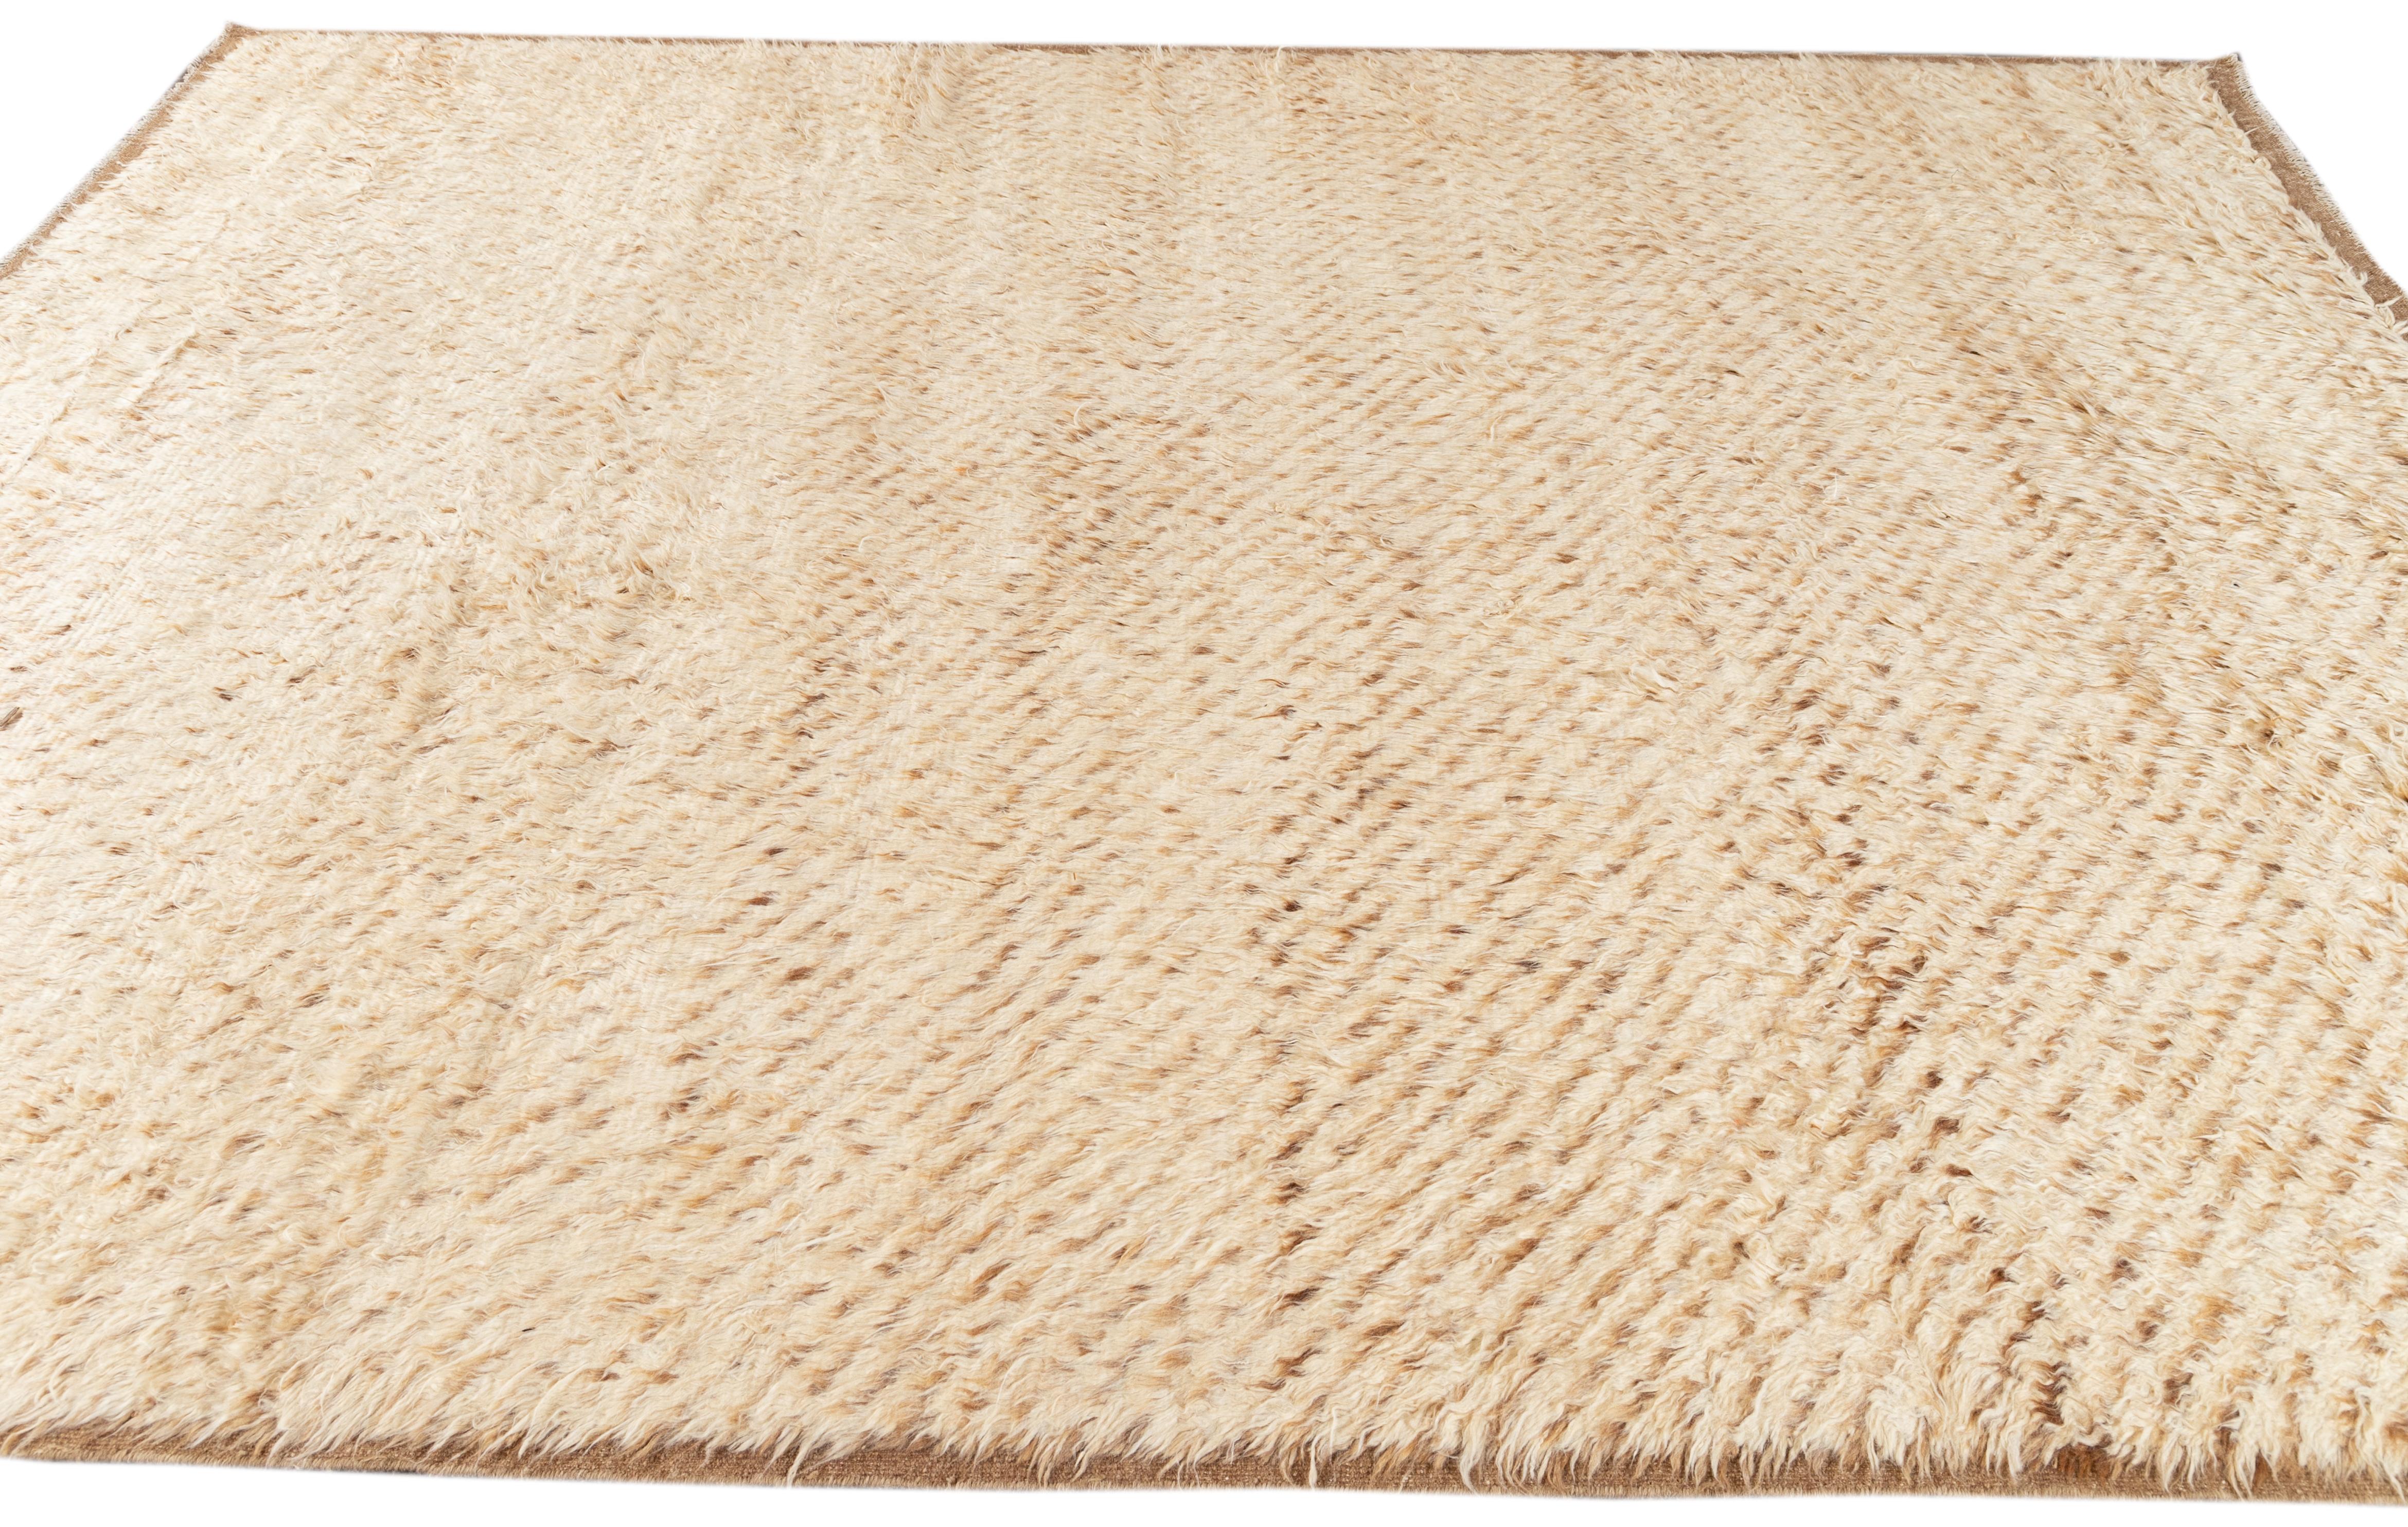 This hand-knotted wool rug showcases a stunning contemporary Moroccan style. It boasts a beautifully plain design, with a tan field and a brown frame. Crafted with utmost precision, this shag rug is a masterpiece that adds a touch of sophistication